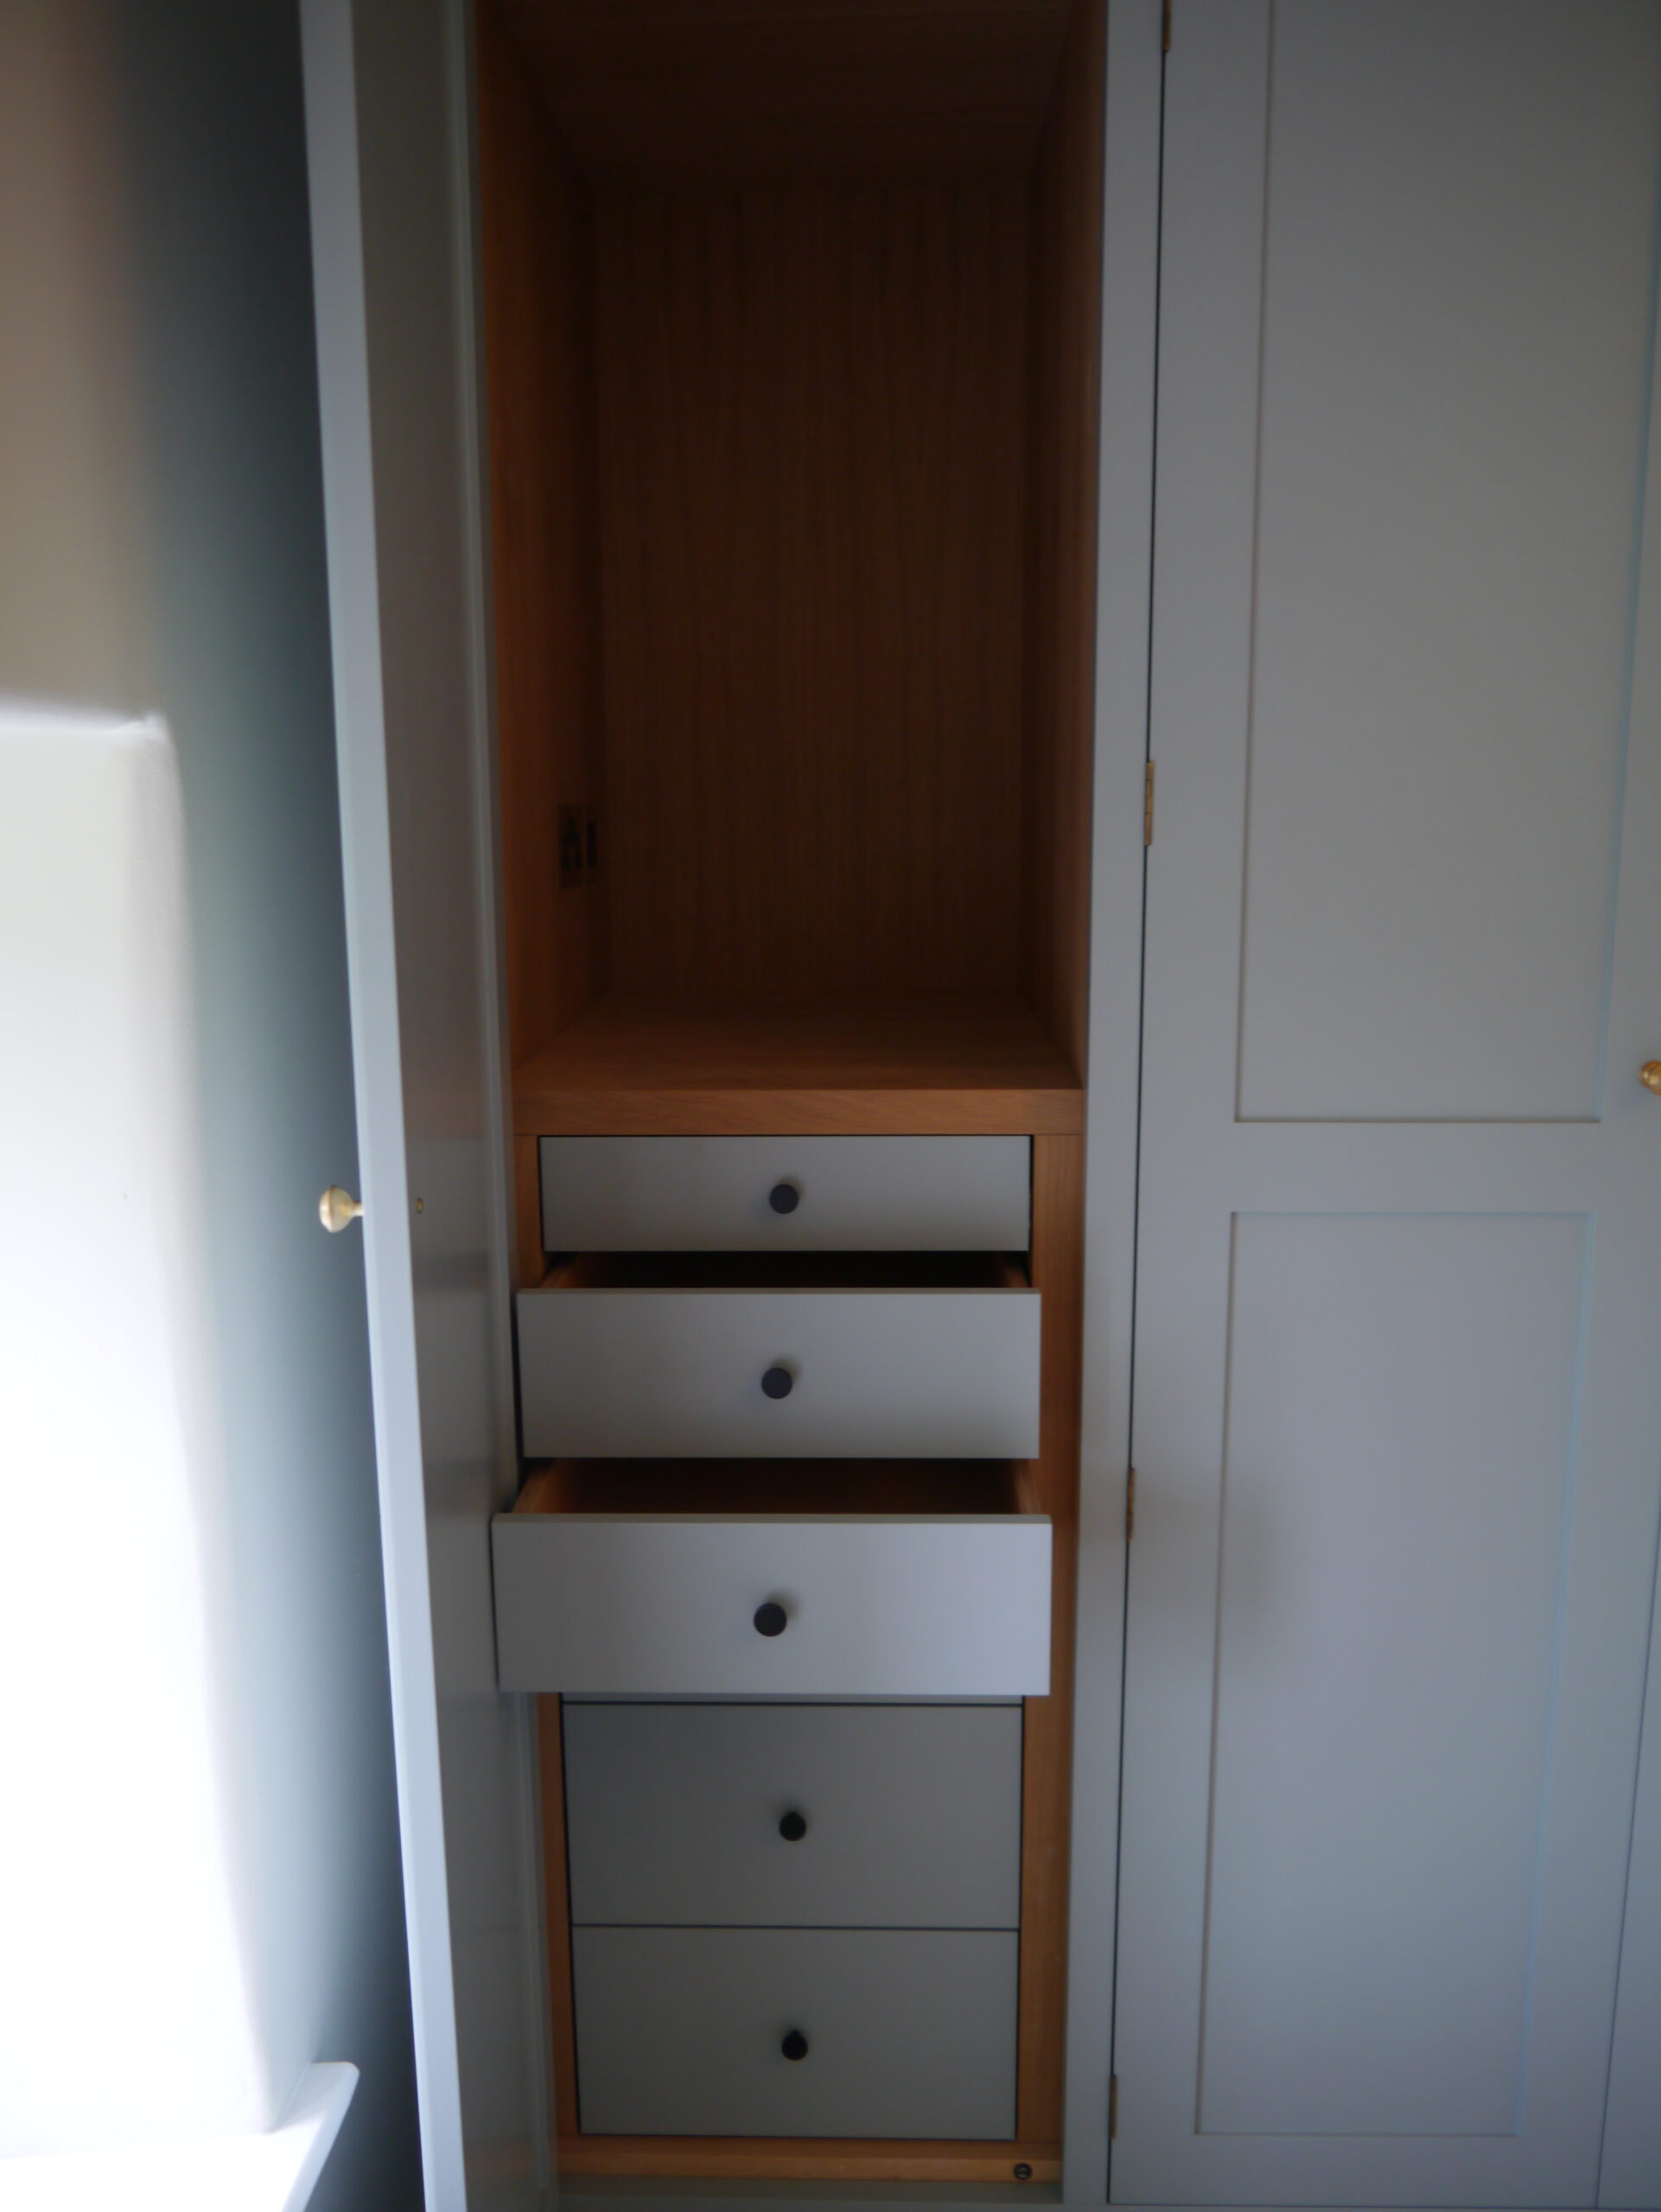 Bespoke timber wardrobe storage draws by Kings Stag Joinery